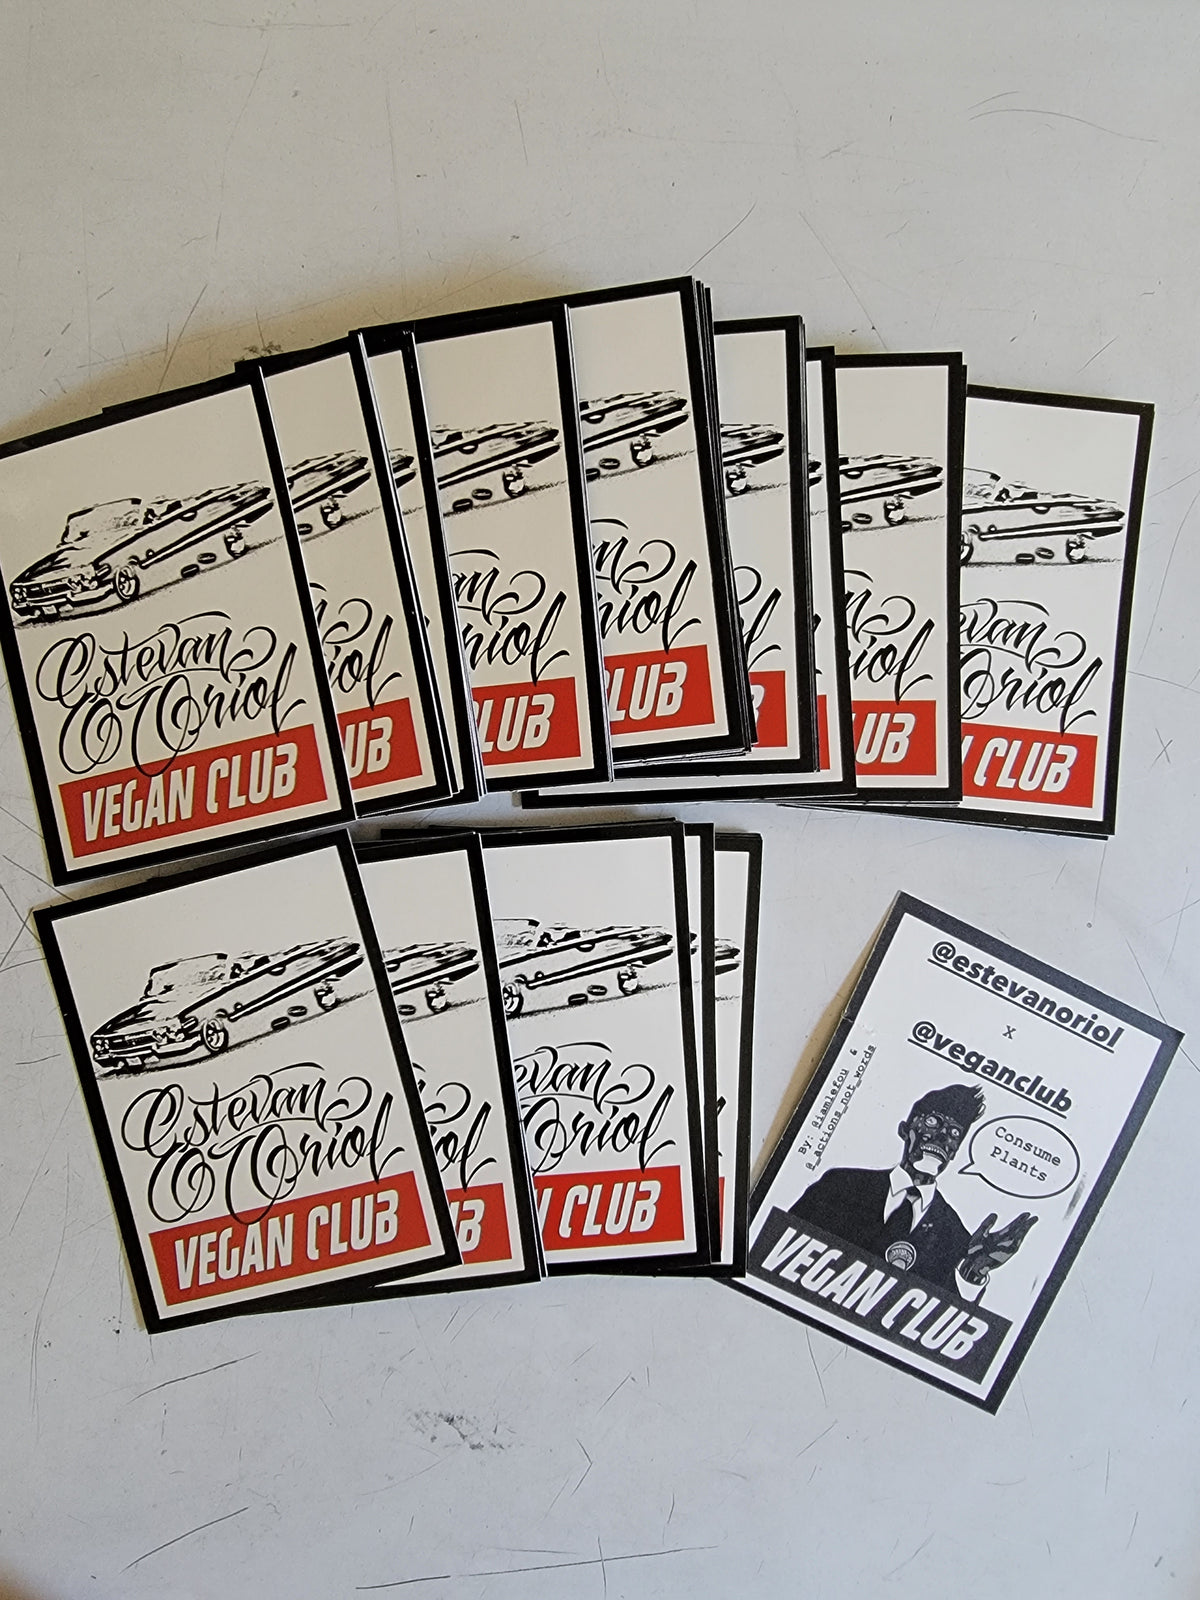 Ltd. Estevan Orial + Vegan Club stickers with art on back by @_actions_not_words